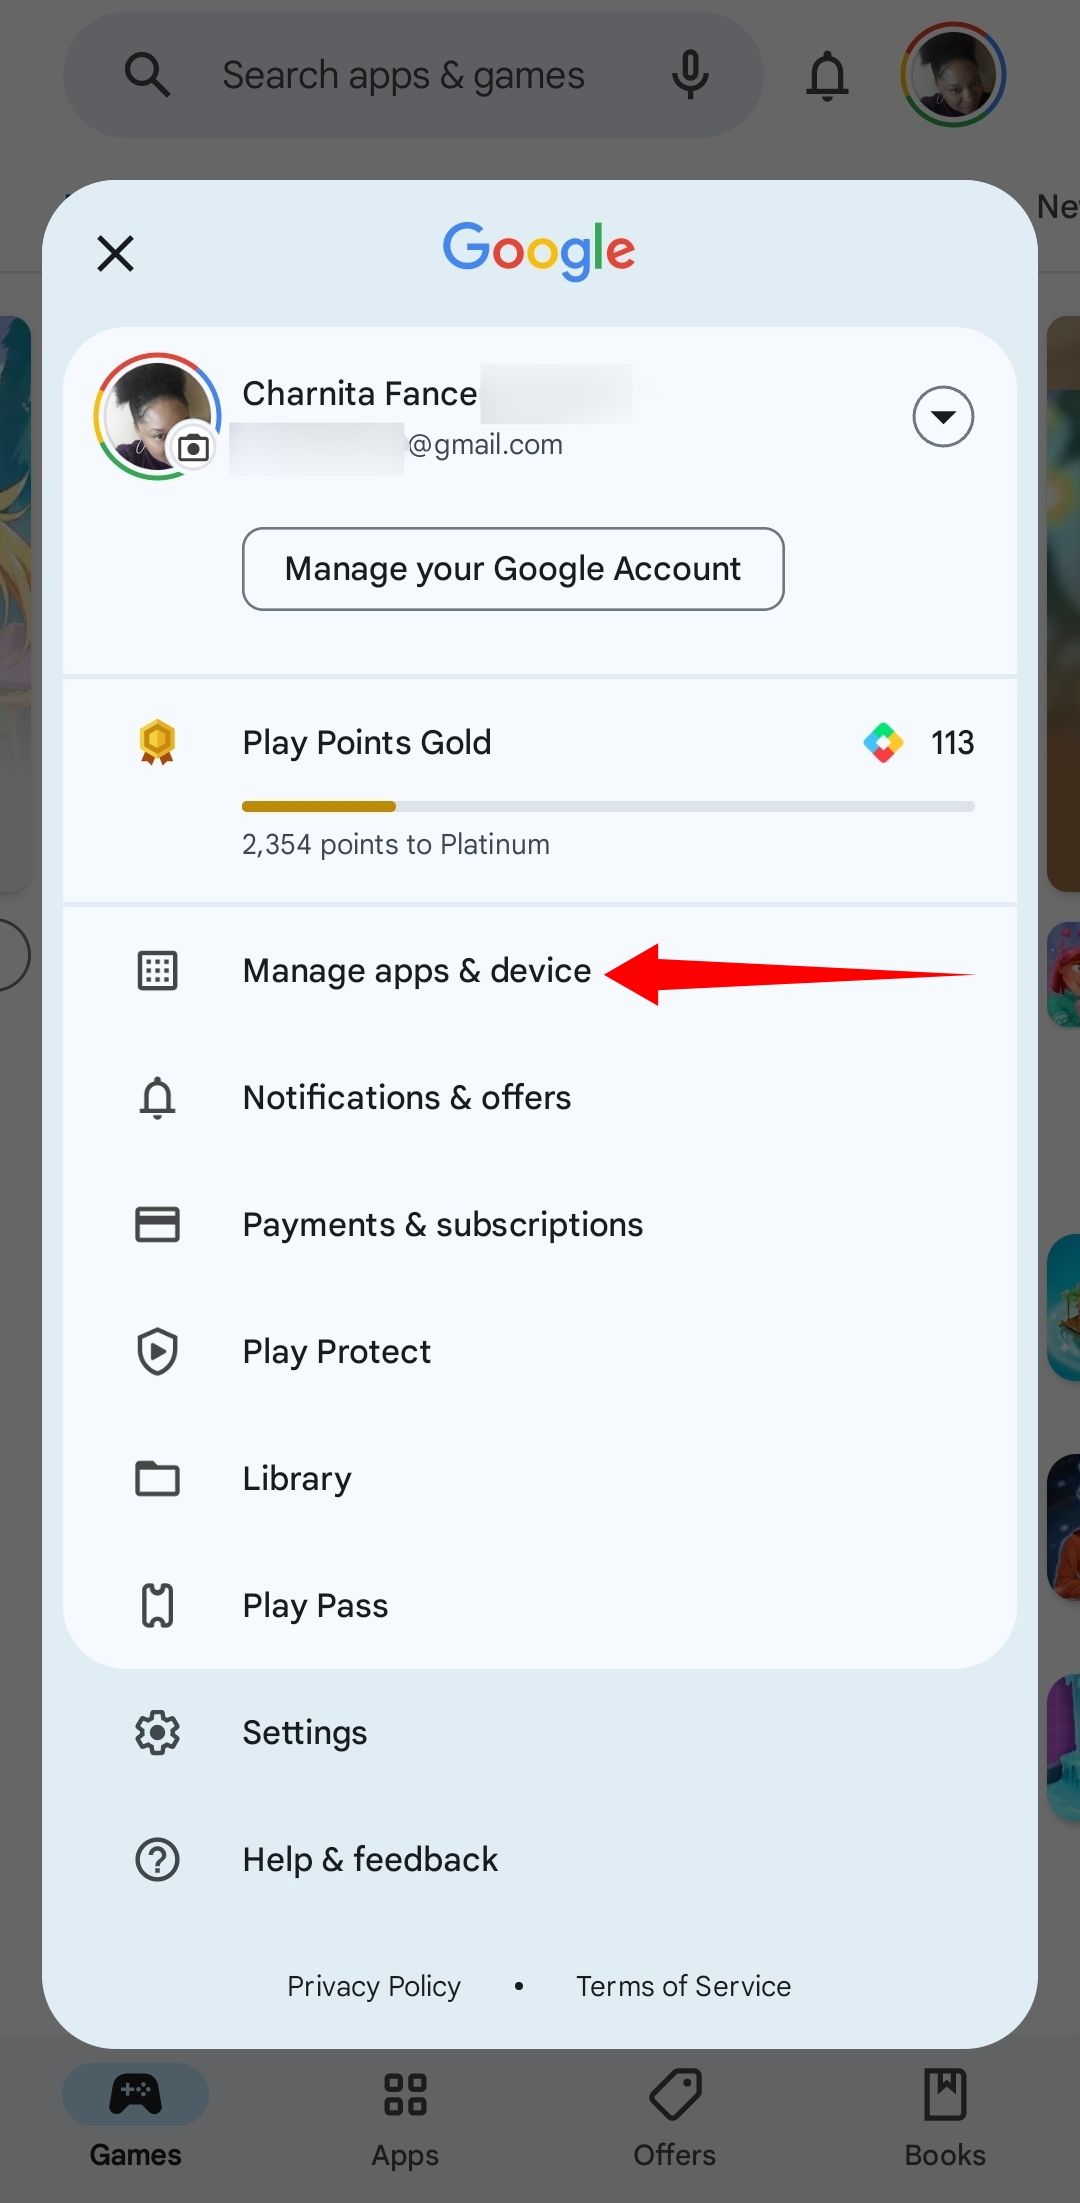 Screenshot of the Manage apps & device menu option in the Google Play Store mobile app